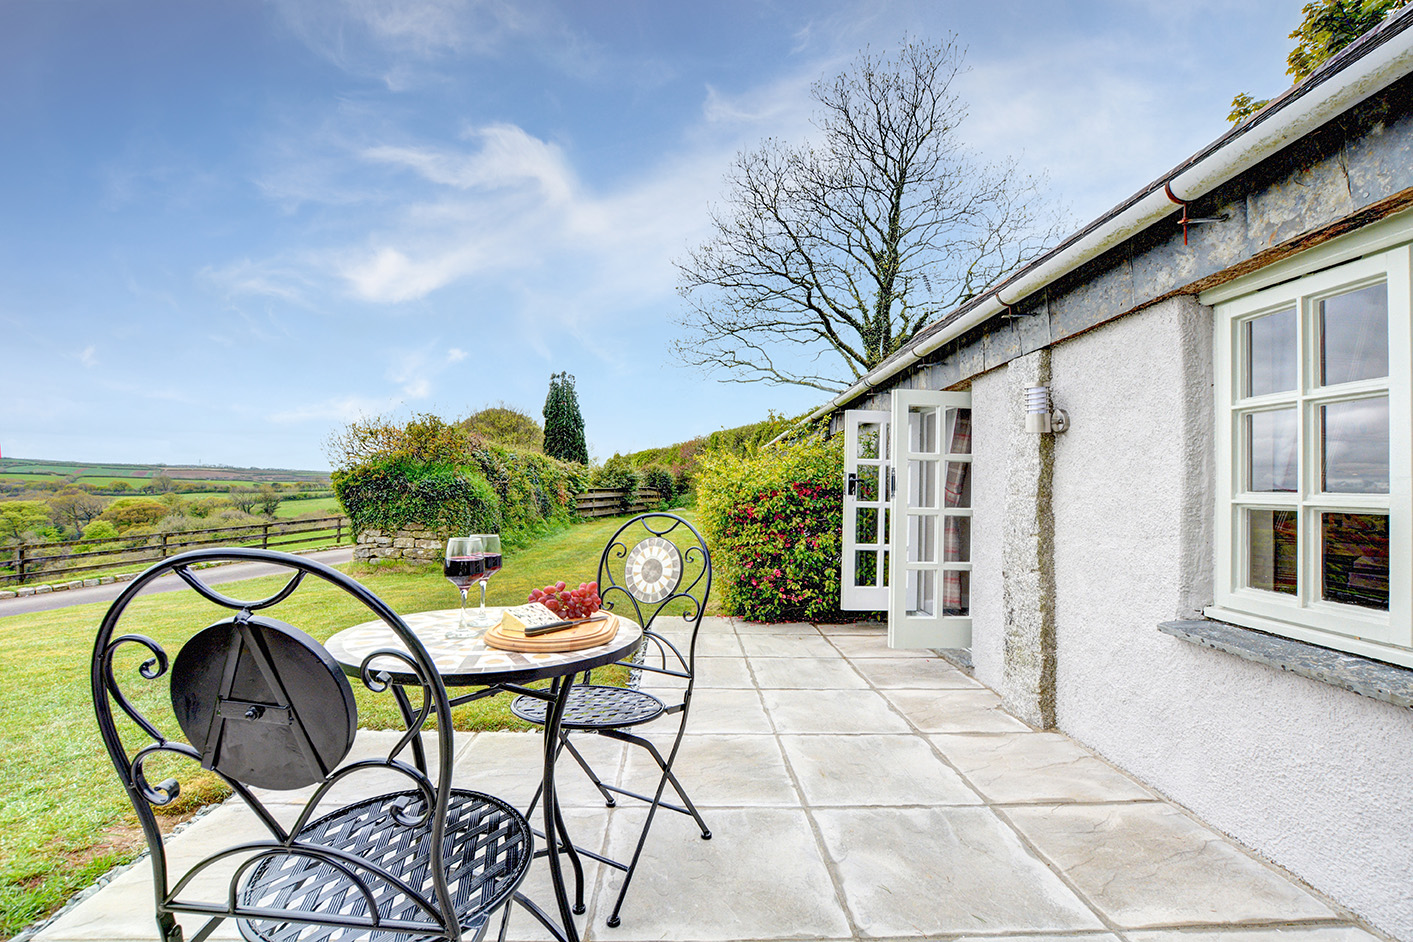 The outside and patio area of The Linney self catering cottage converted barn at Penrose Burden holiday cottages in Cornwall.jpg